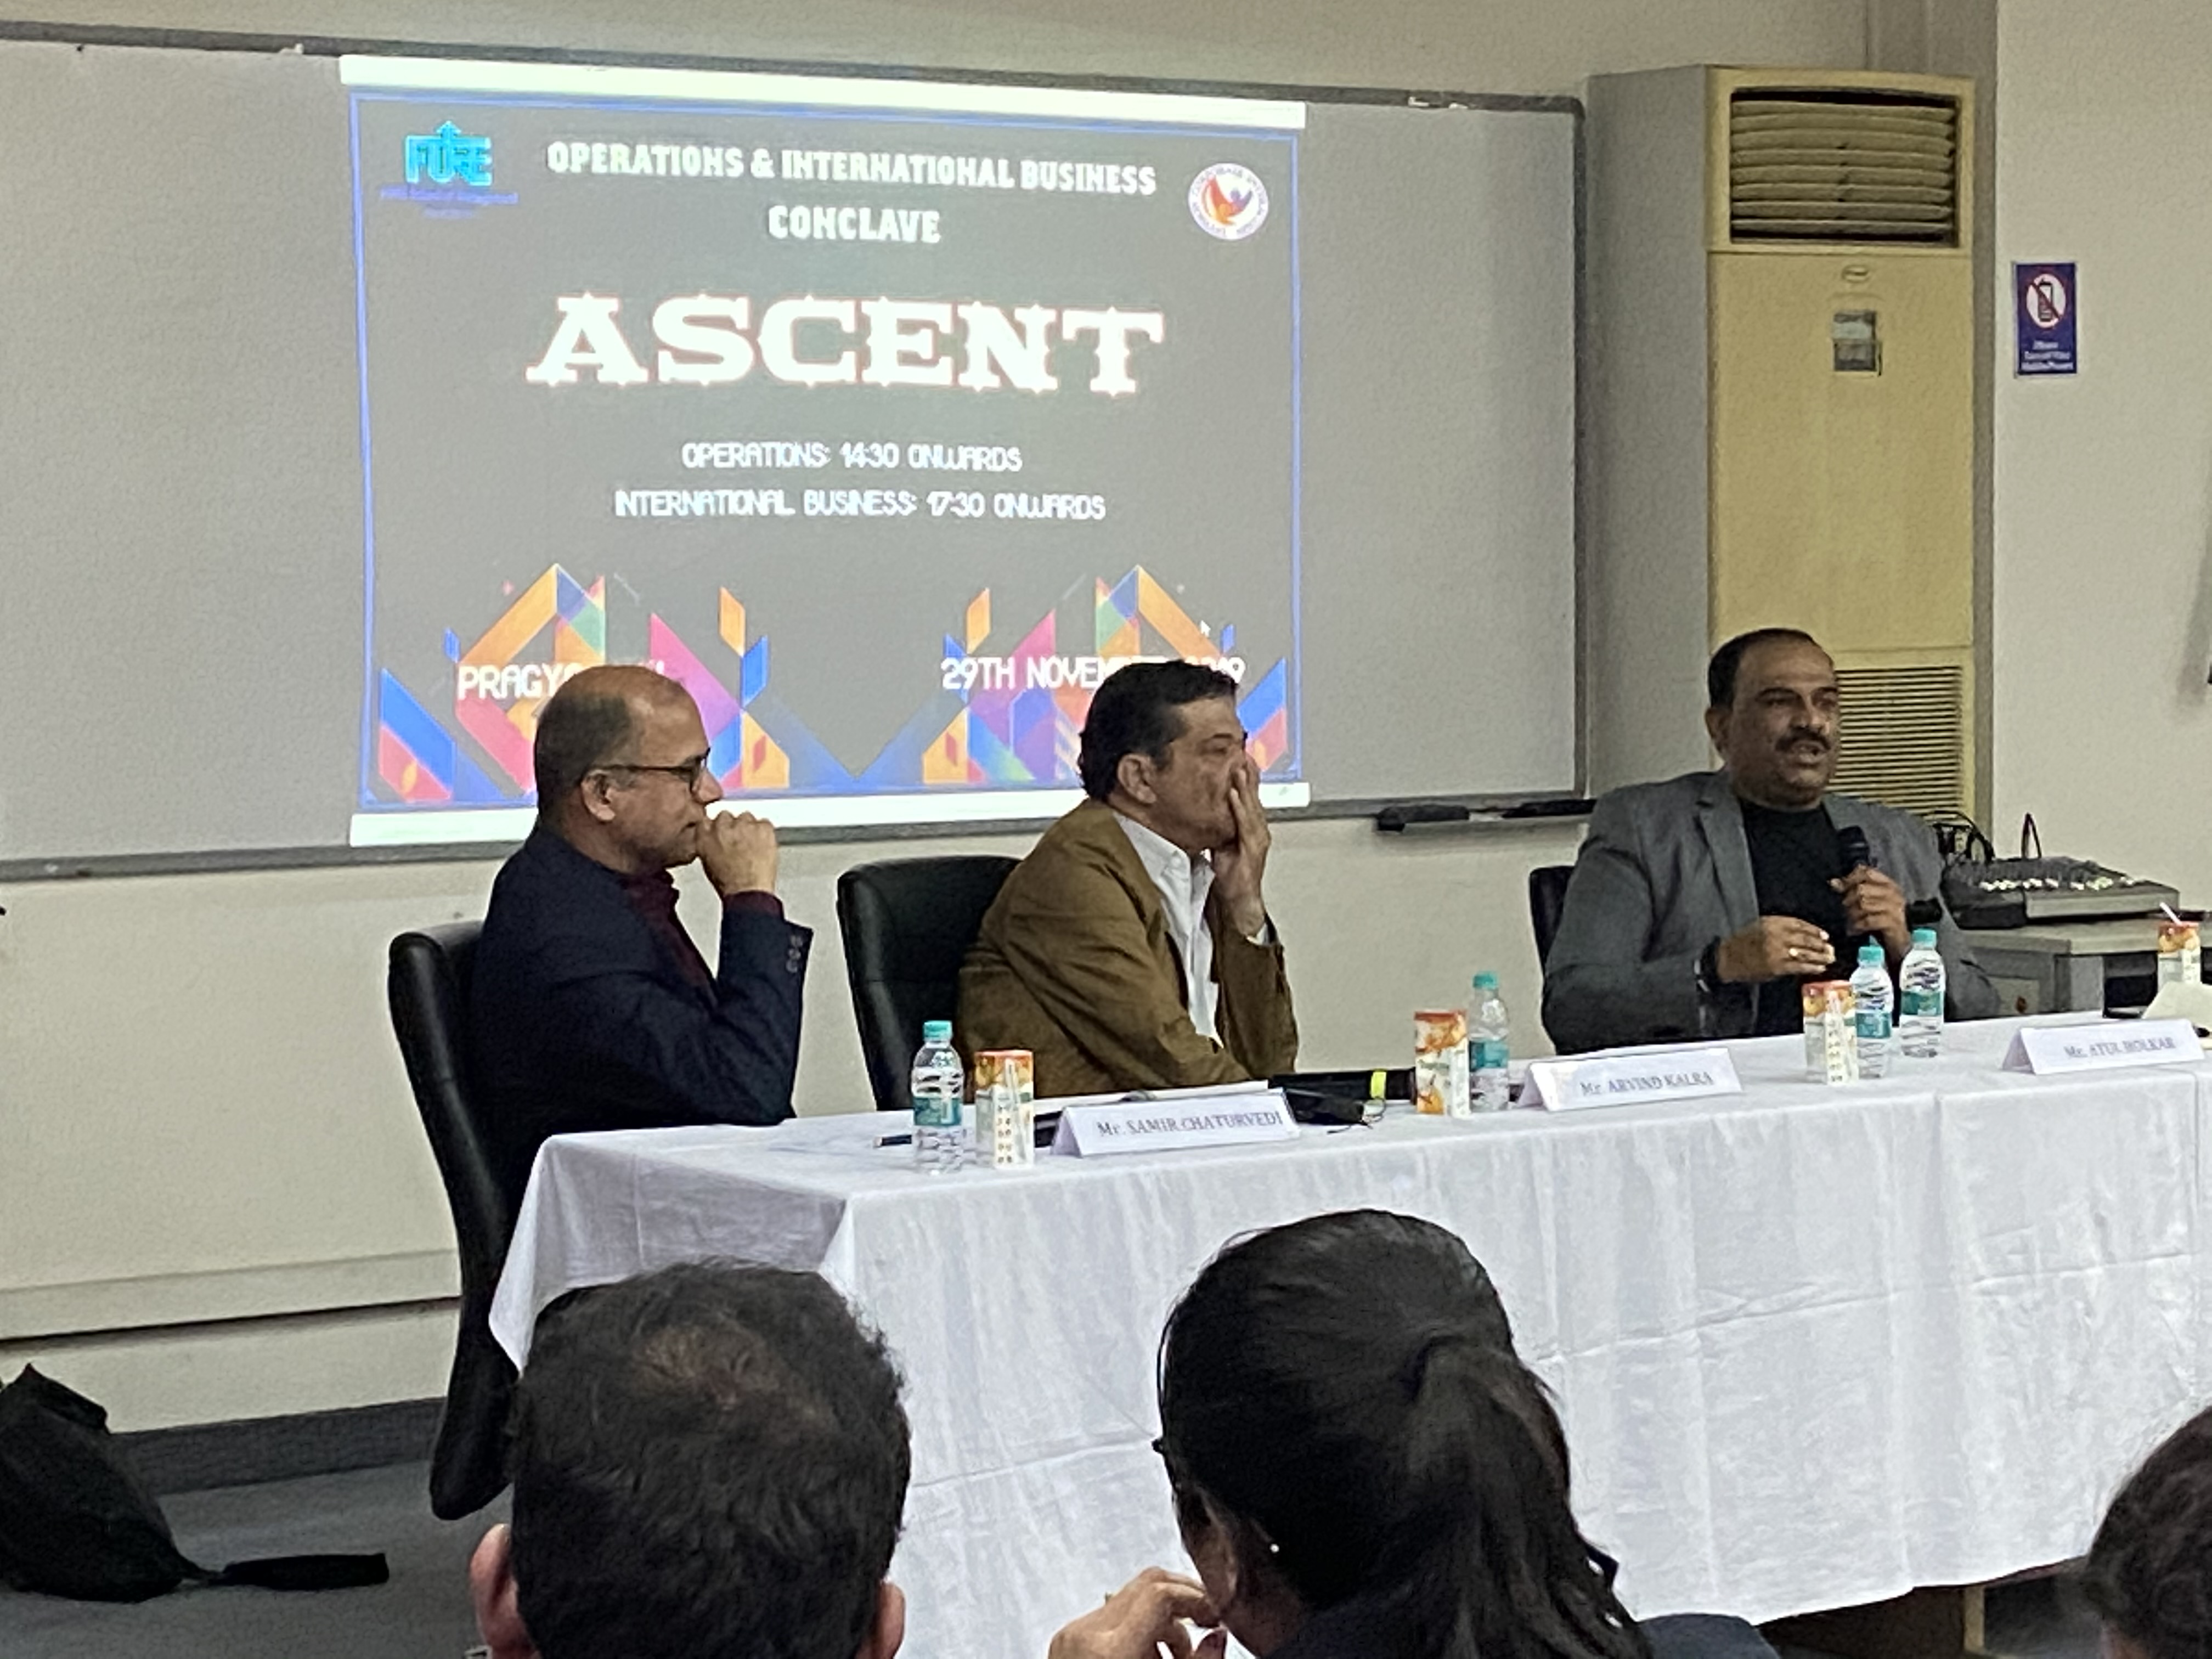 Ascent (Operations – IB Conclave) 2019-20